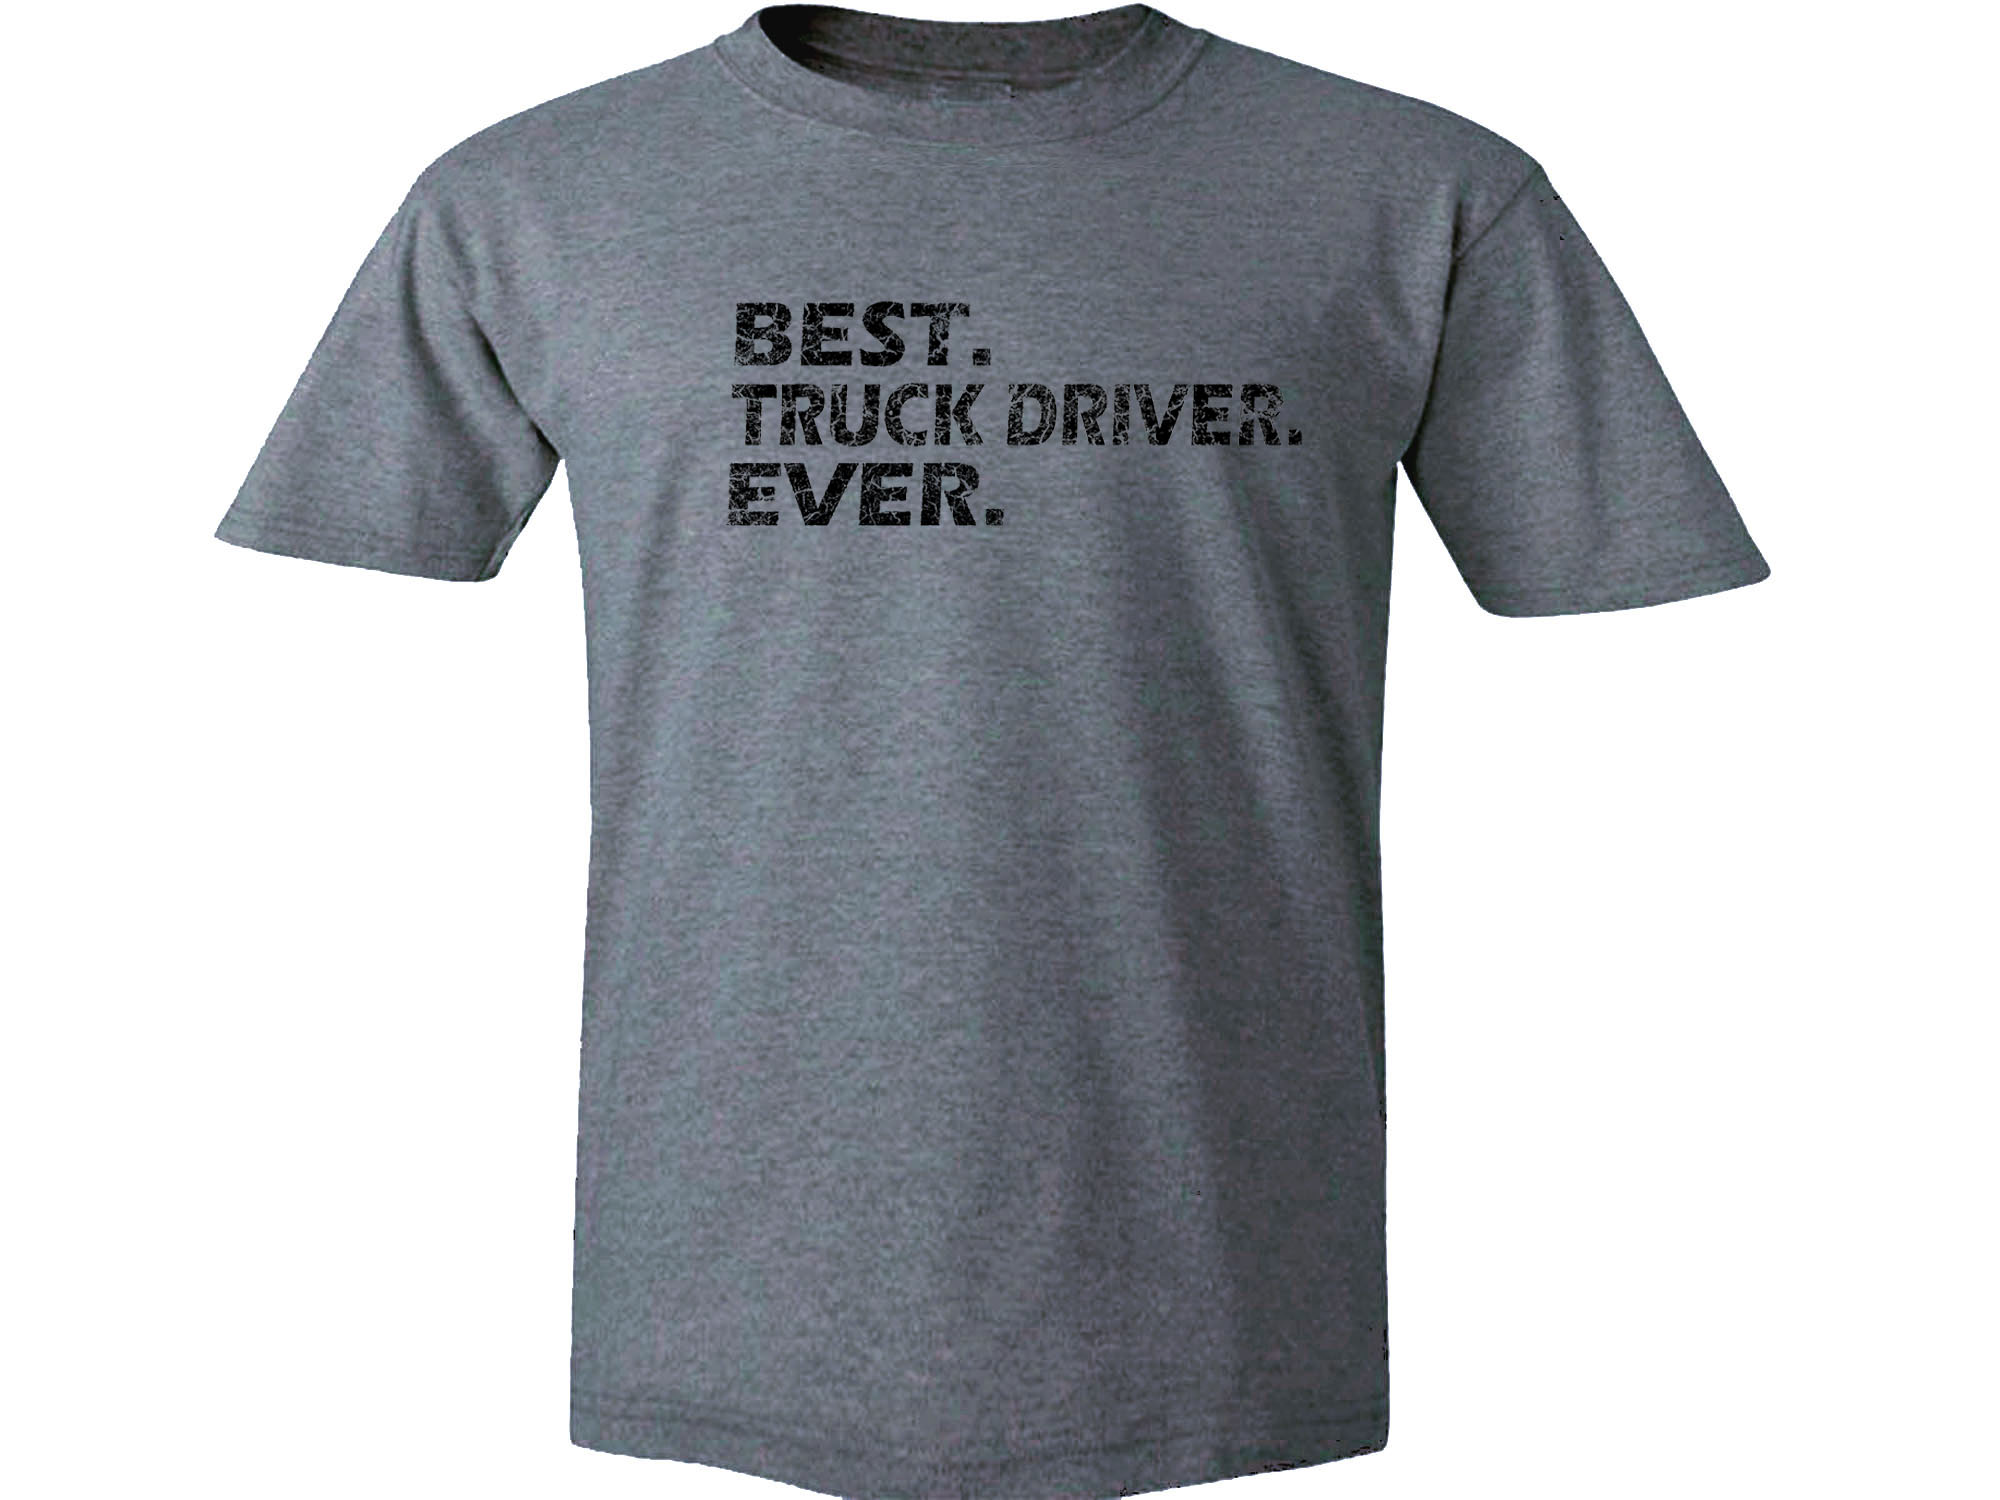 Best truck driver ever distressed print t-shirt Great Gift!!!